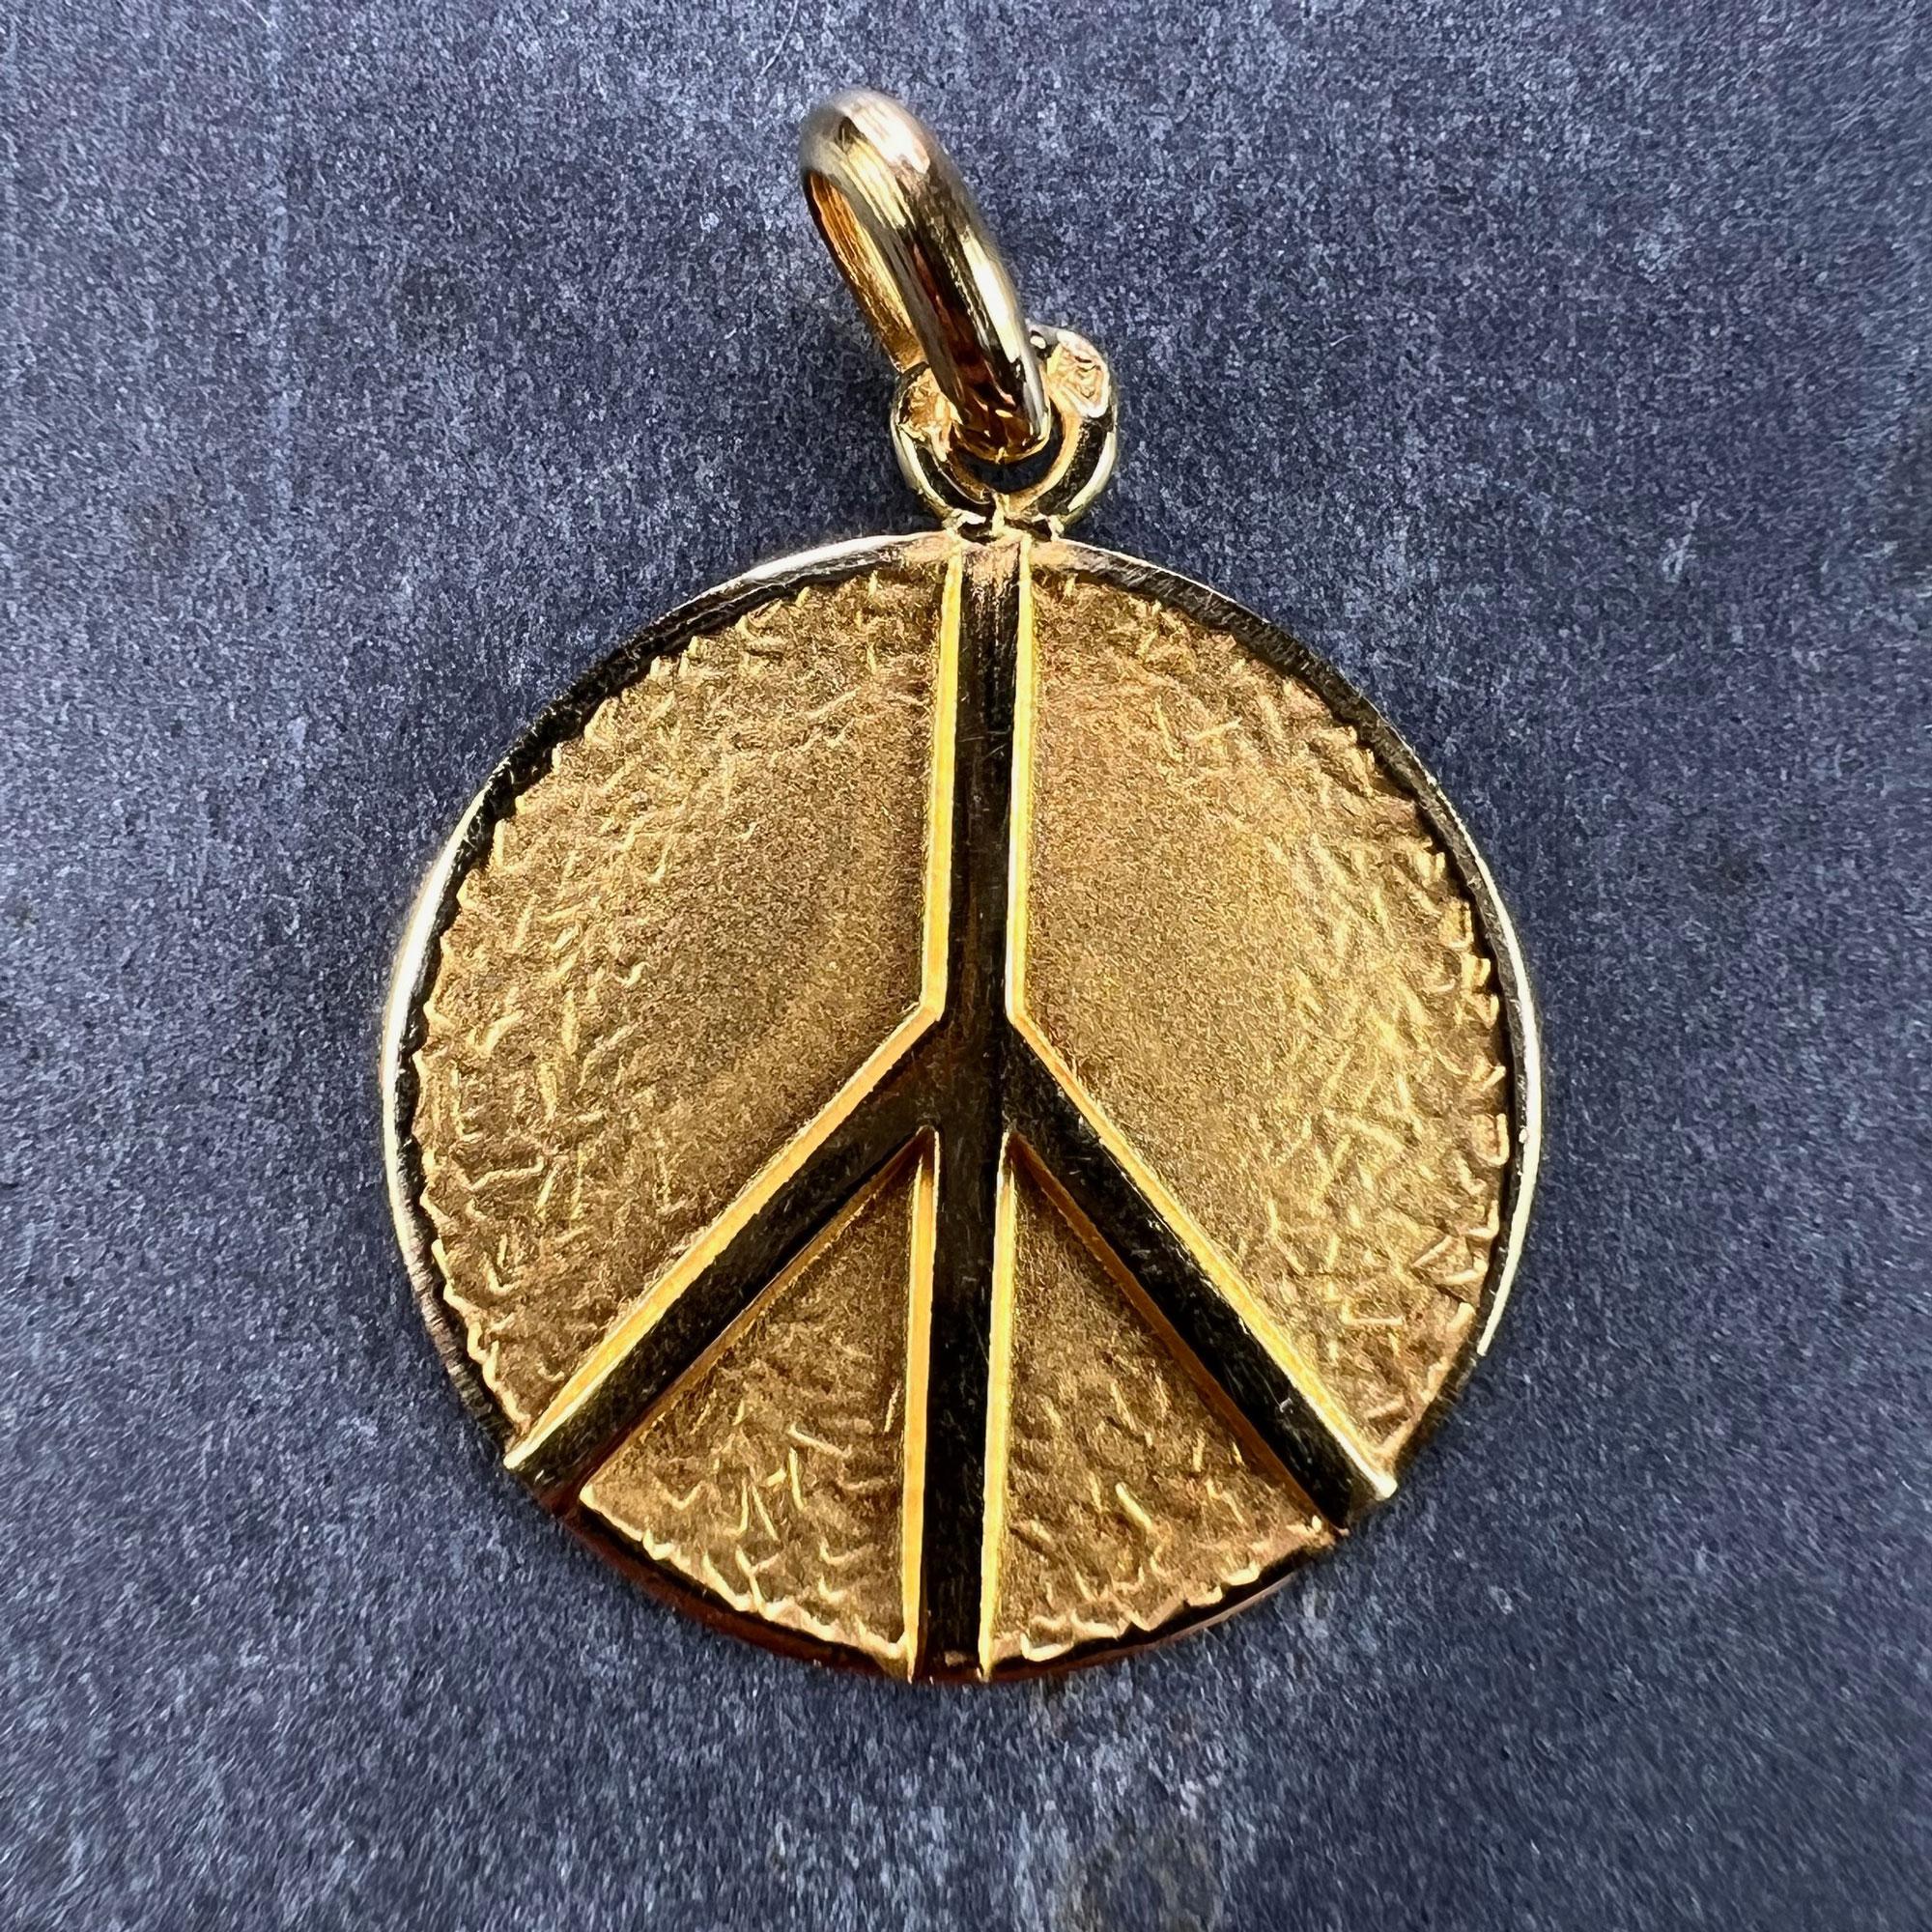 A French 18 karat (18K) yellow gold charm pendant designed as a medal depicting a peace sign on a textured background. Stamped with the eagle’s head for 18 karat gold and French manufacture with an unknown makers mark.

Dimensions: 2.2 x 1.9 x 0.12